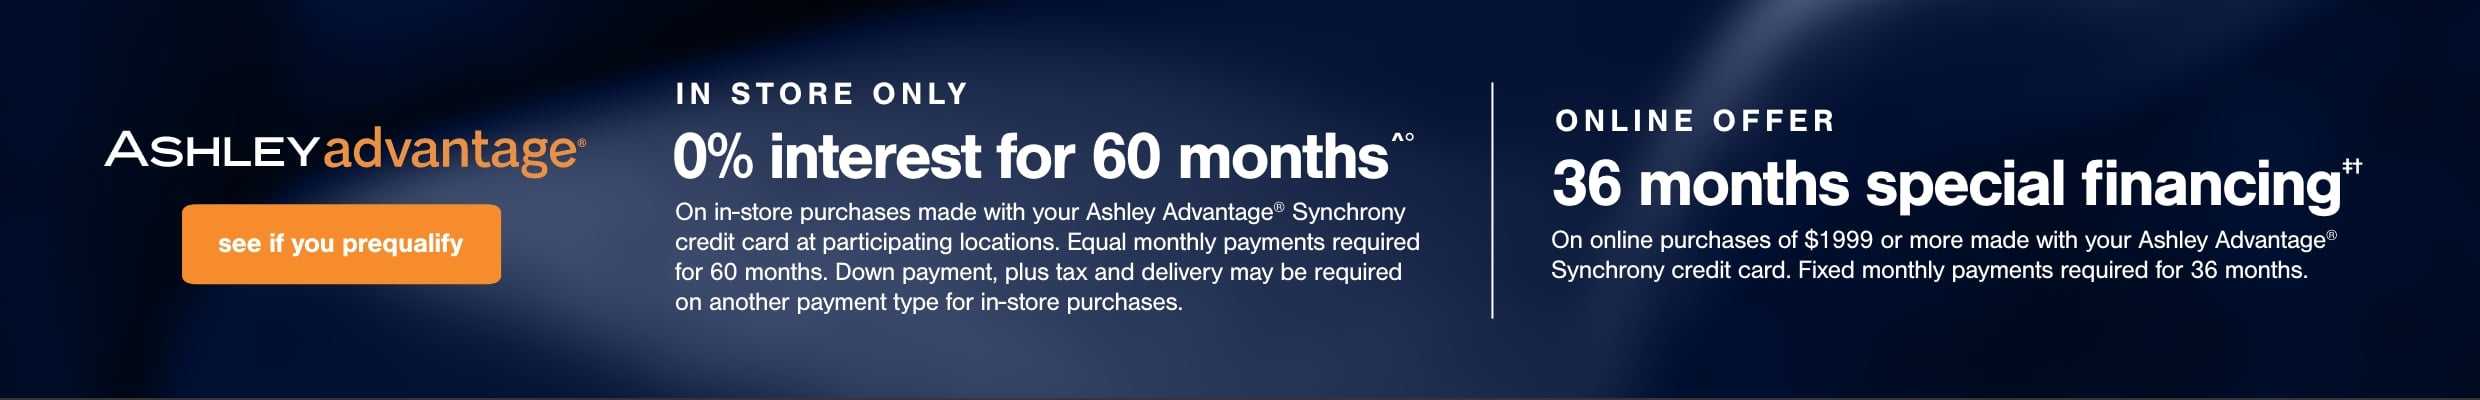 Ashley's Special Financing